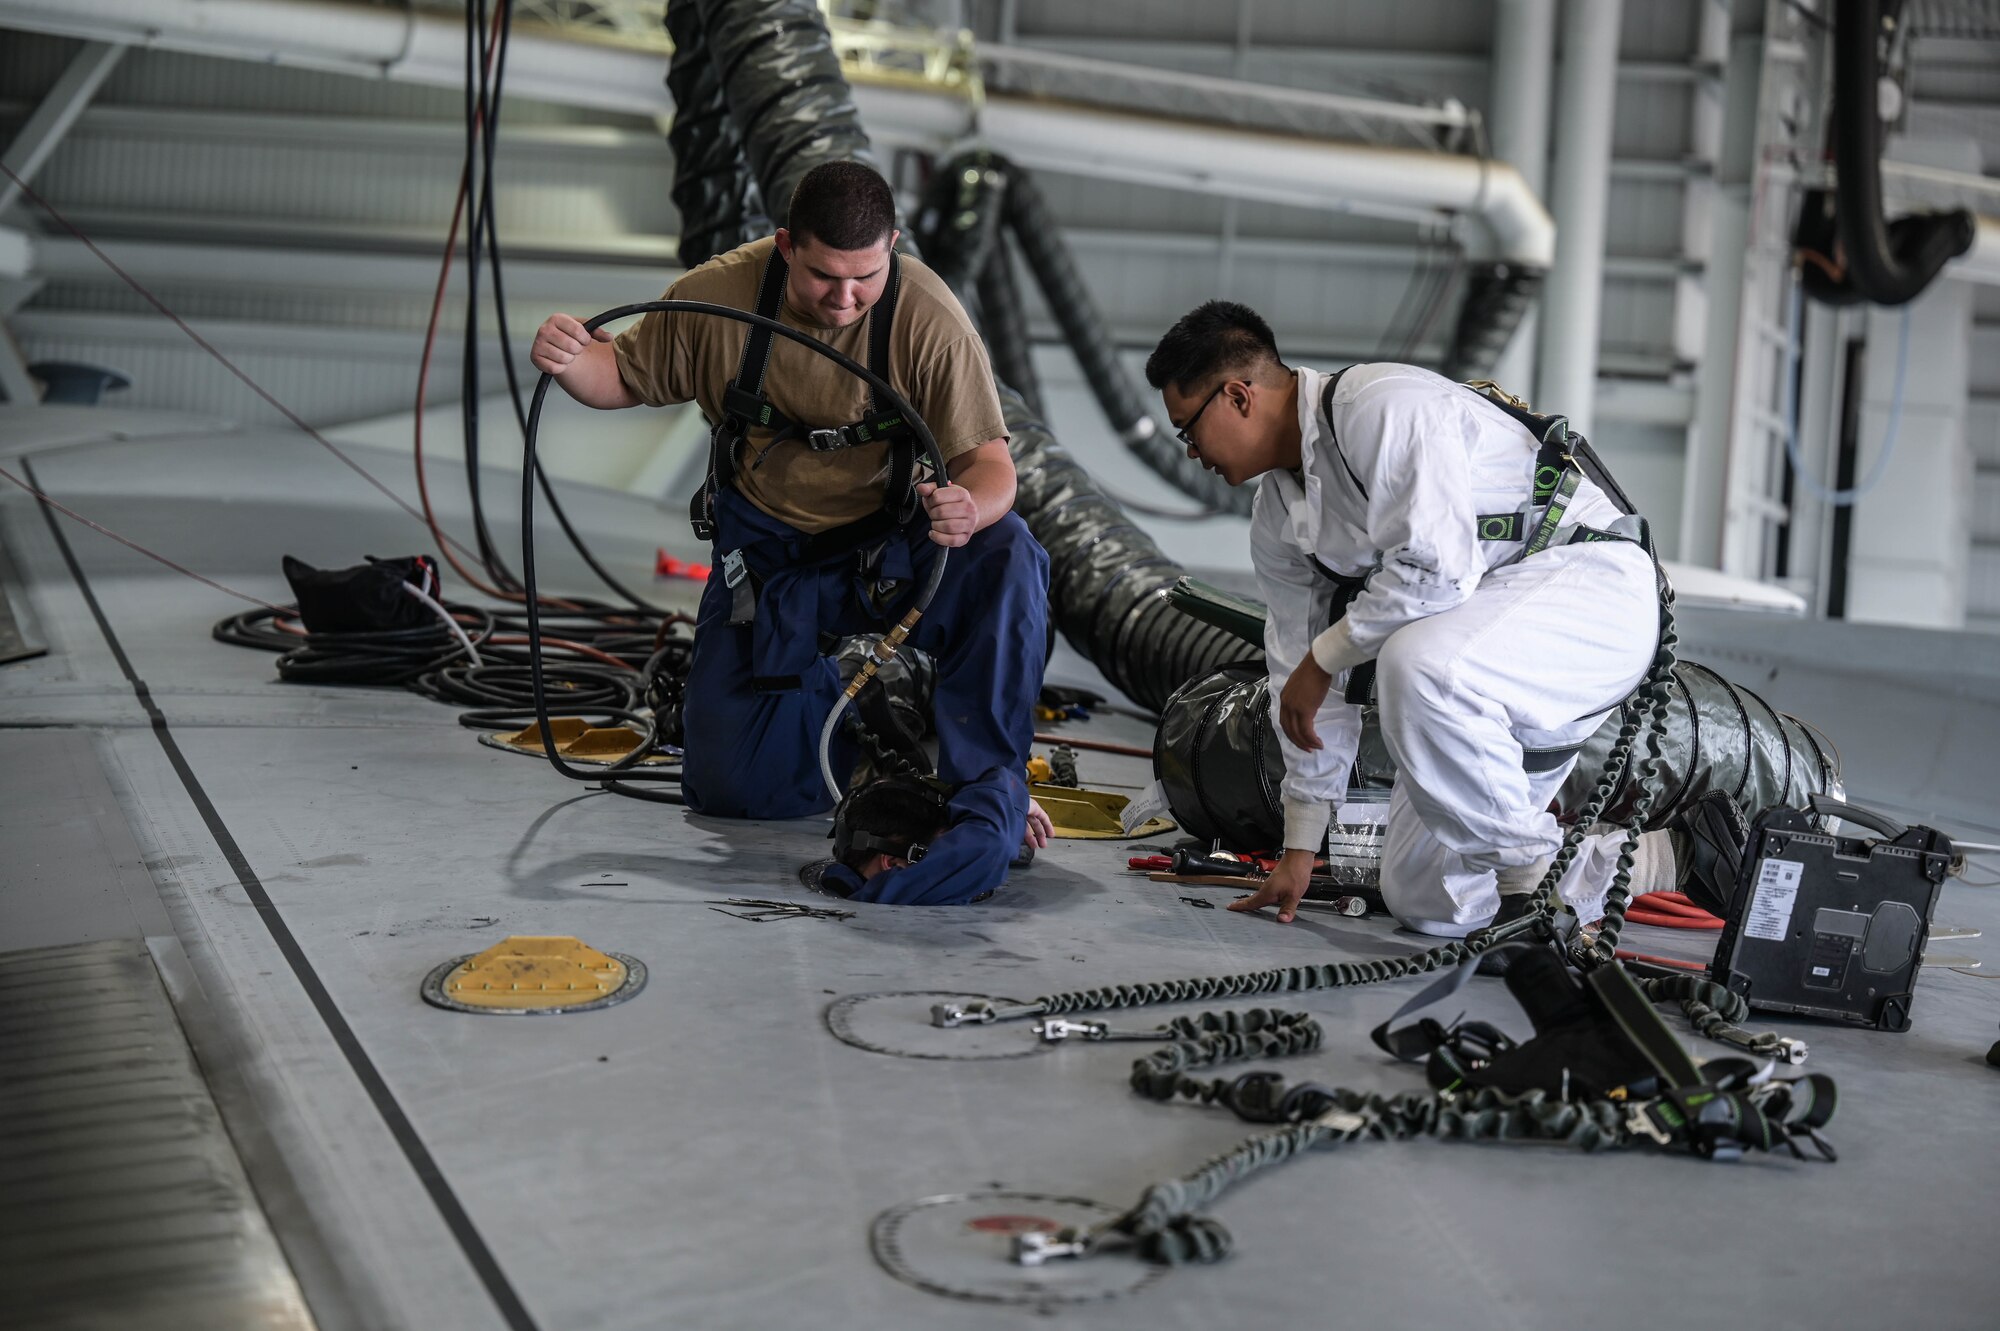 Maintainers assigned to the 154th Maintenance Squadron and 15th MXS begin an in-tank maintenance procedure on a C-17 Globemaster III at Joint Base Pearl Harbor-Hickam, Hawaii, May 2, 2022. The Airmen replaced an electrical wire harness, which provides electricity to the fuel pump for the number two engine. (U.S. Air Force photo by Staff Sgt. Alan Ricker)